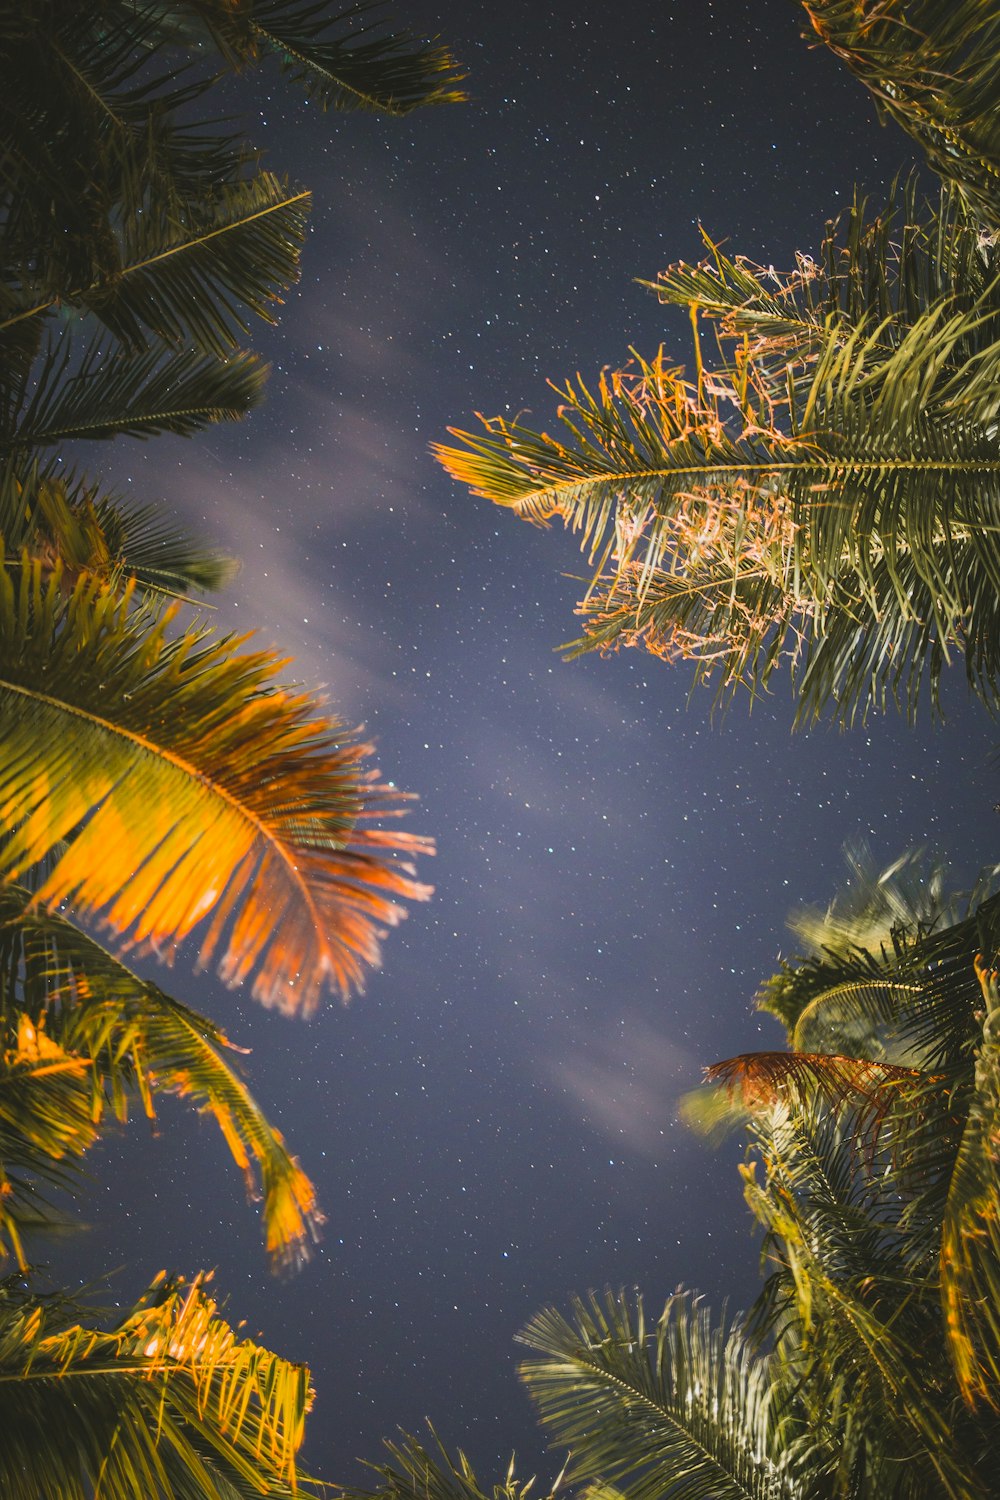 a night sky with stars and palm trees